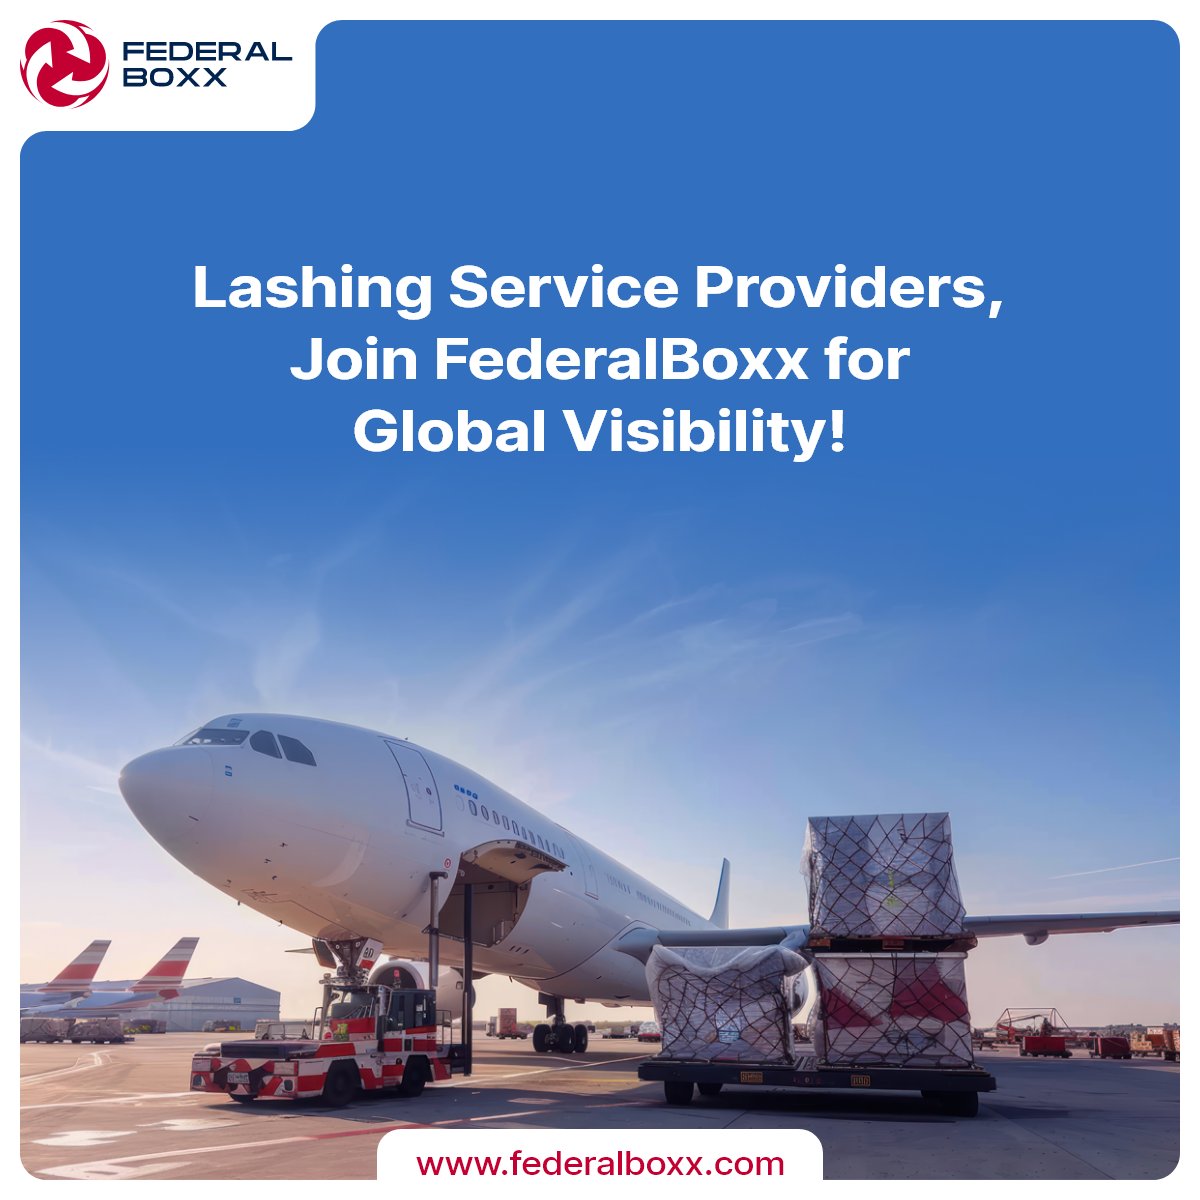 Lashing Service Providers, unlock global visibility with FederalBoxx! Join now and connect with a worldwide network of clients.  #LashingServices #GlobalVisibility #FederalBoxx